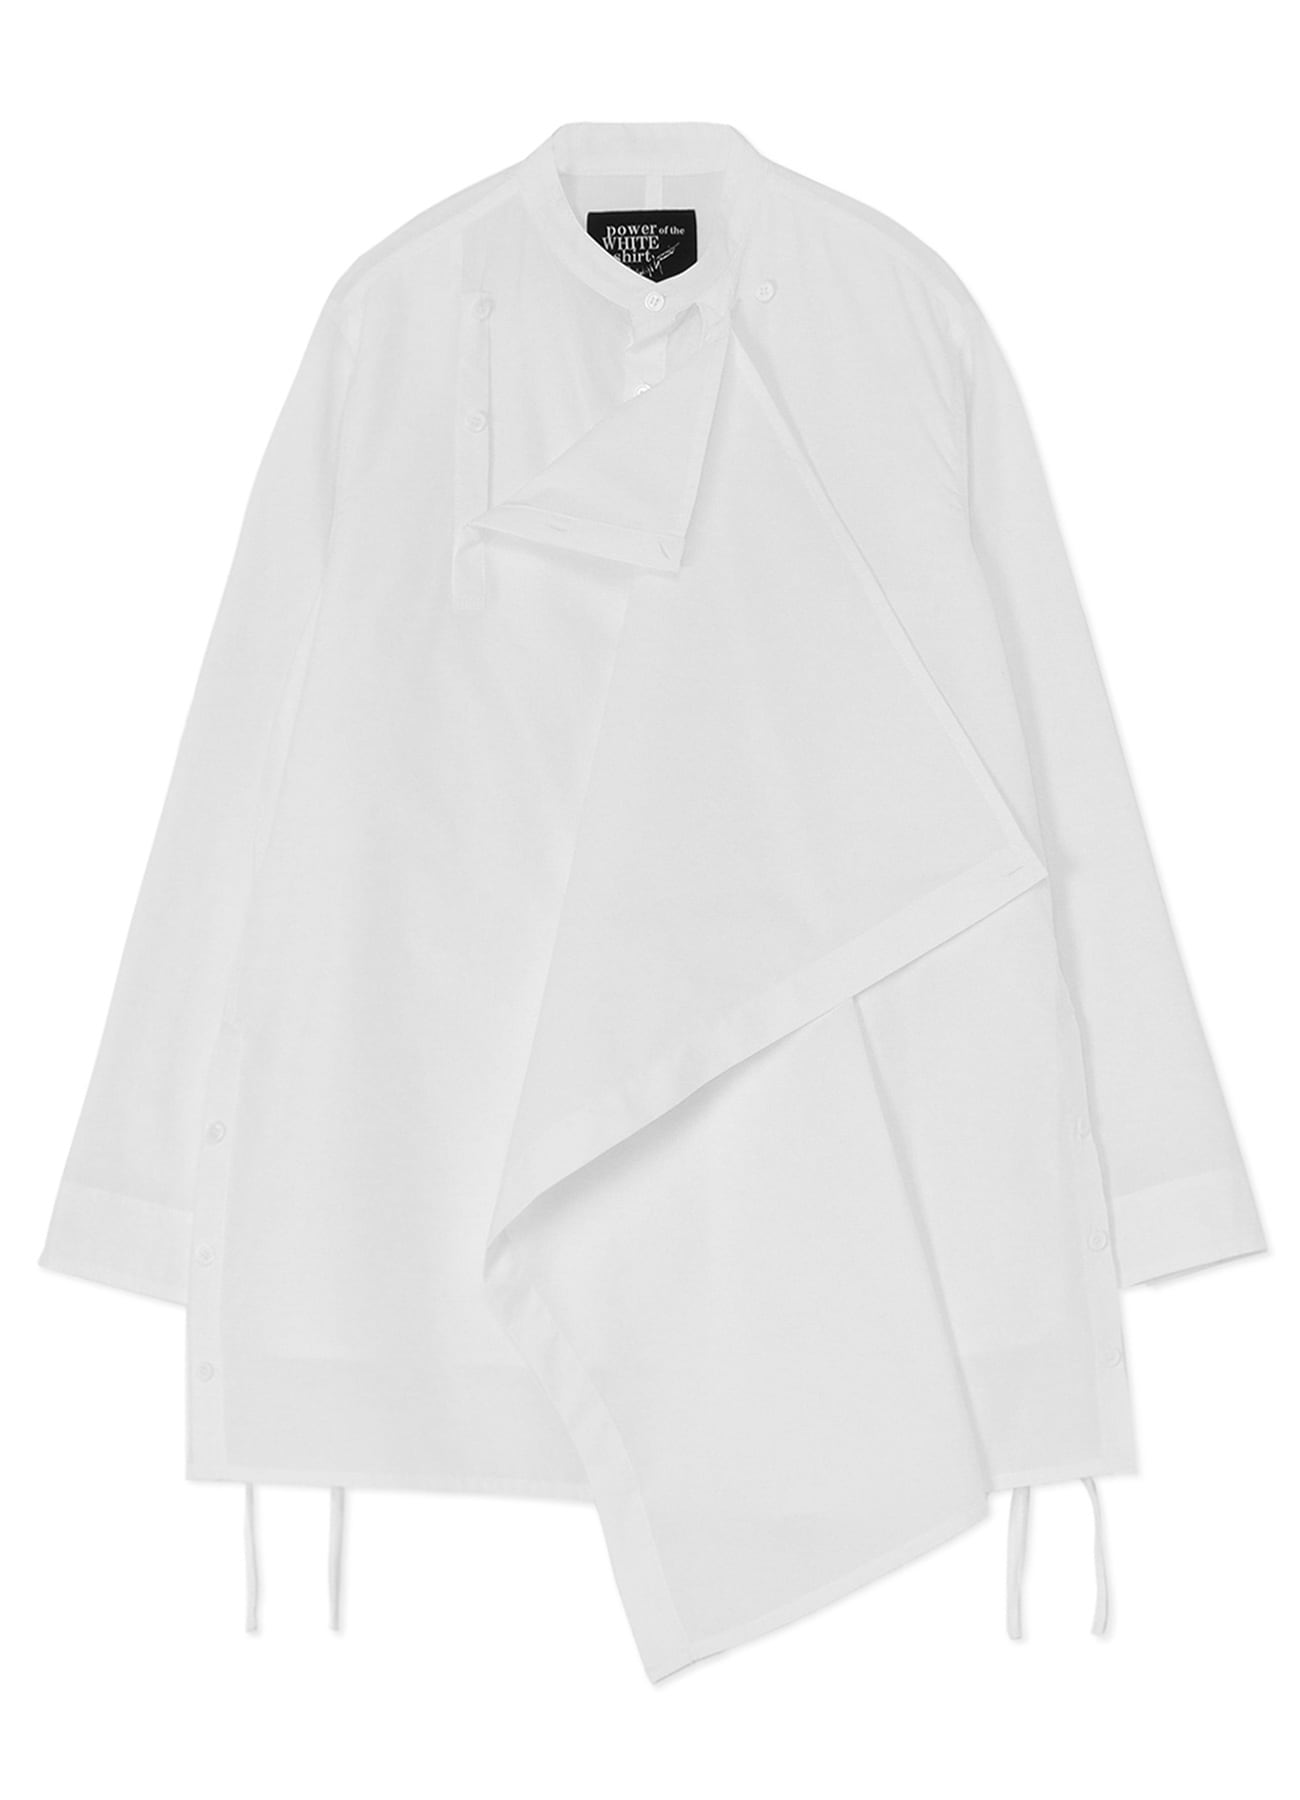 MANDARIN COLLAR SHIRT WITH BUTTON-UP FRONT FLAP(S White): power of 